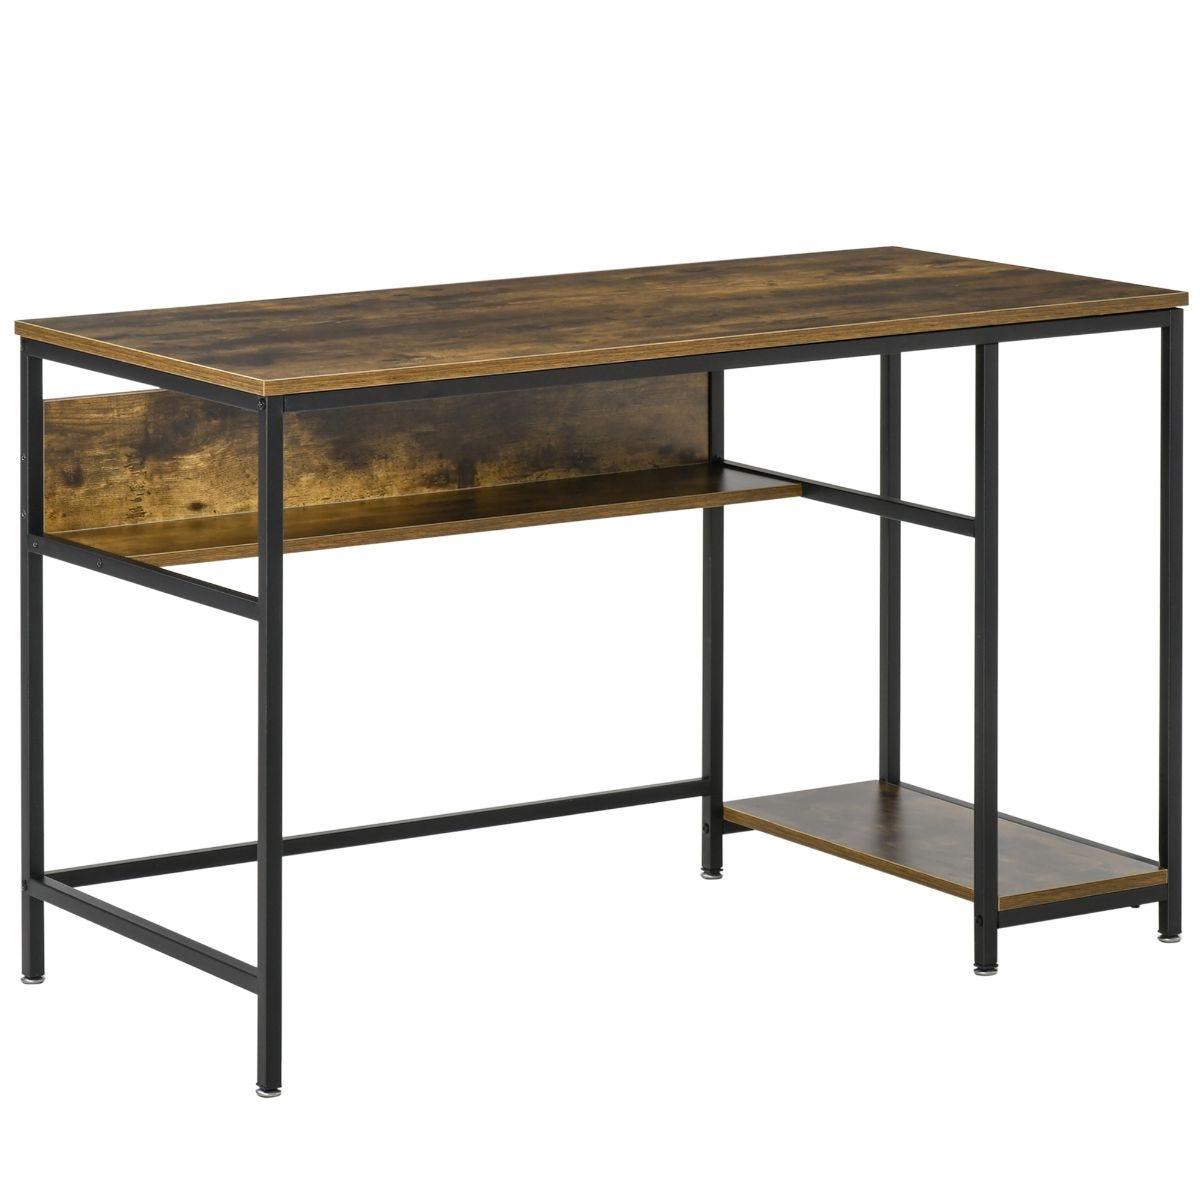 Homcom Industrial Style Home Office Computer Writing Desk With Storage Rustic Brown Finish Metal Frame